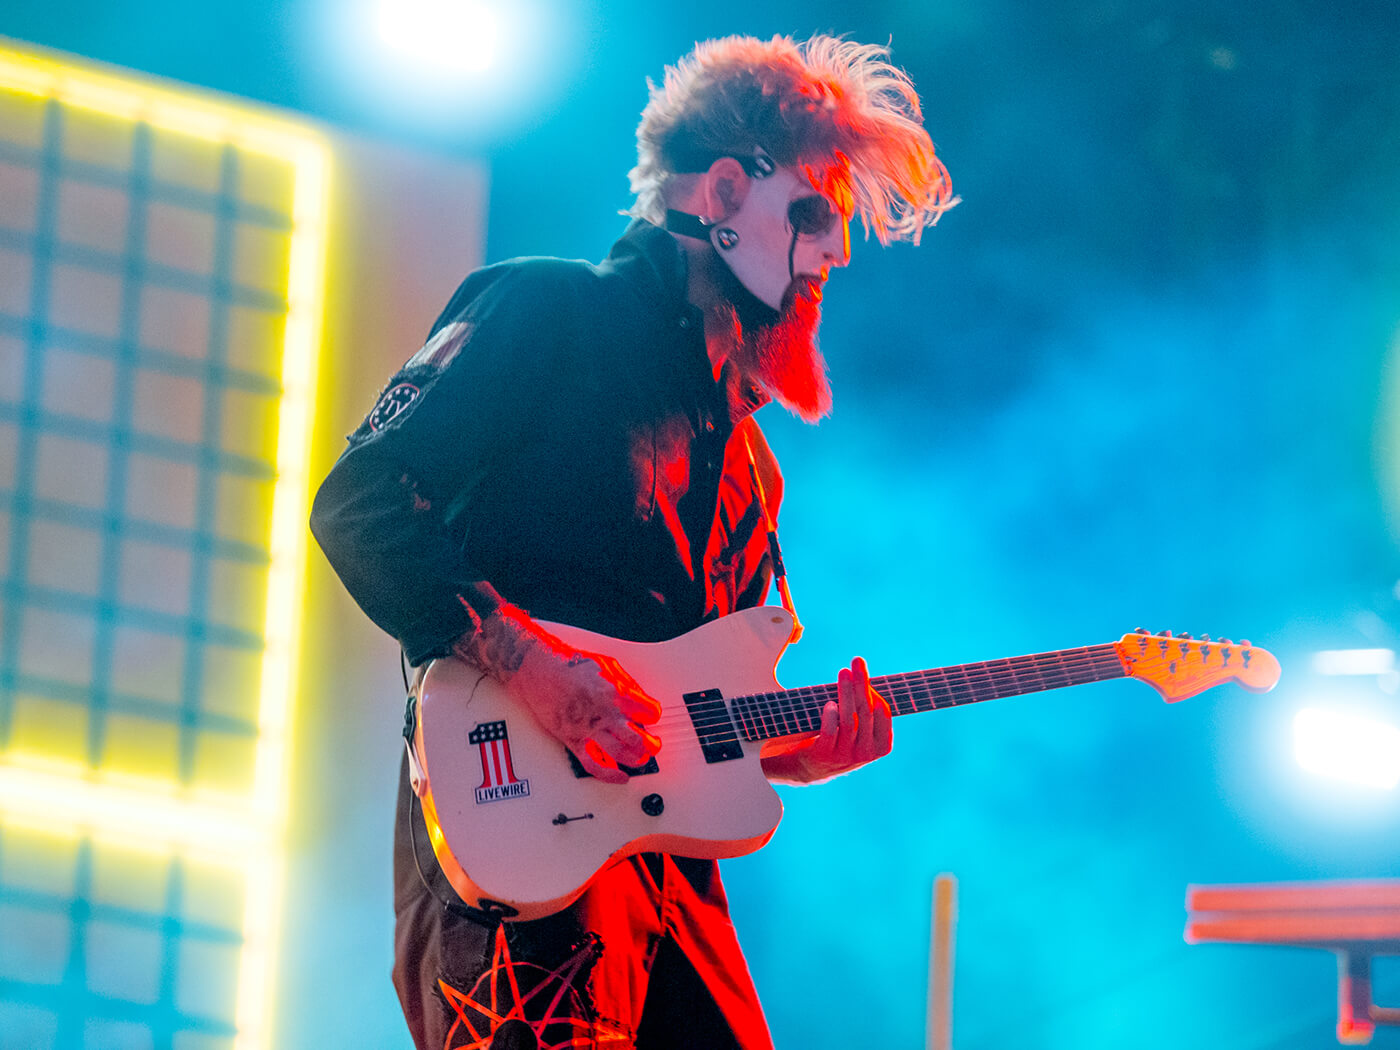 Jim Root live with white fender jazzmaster